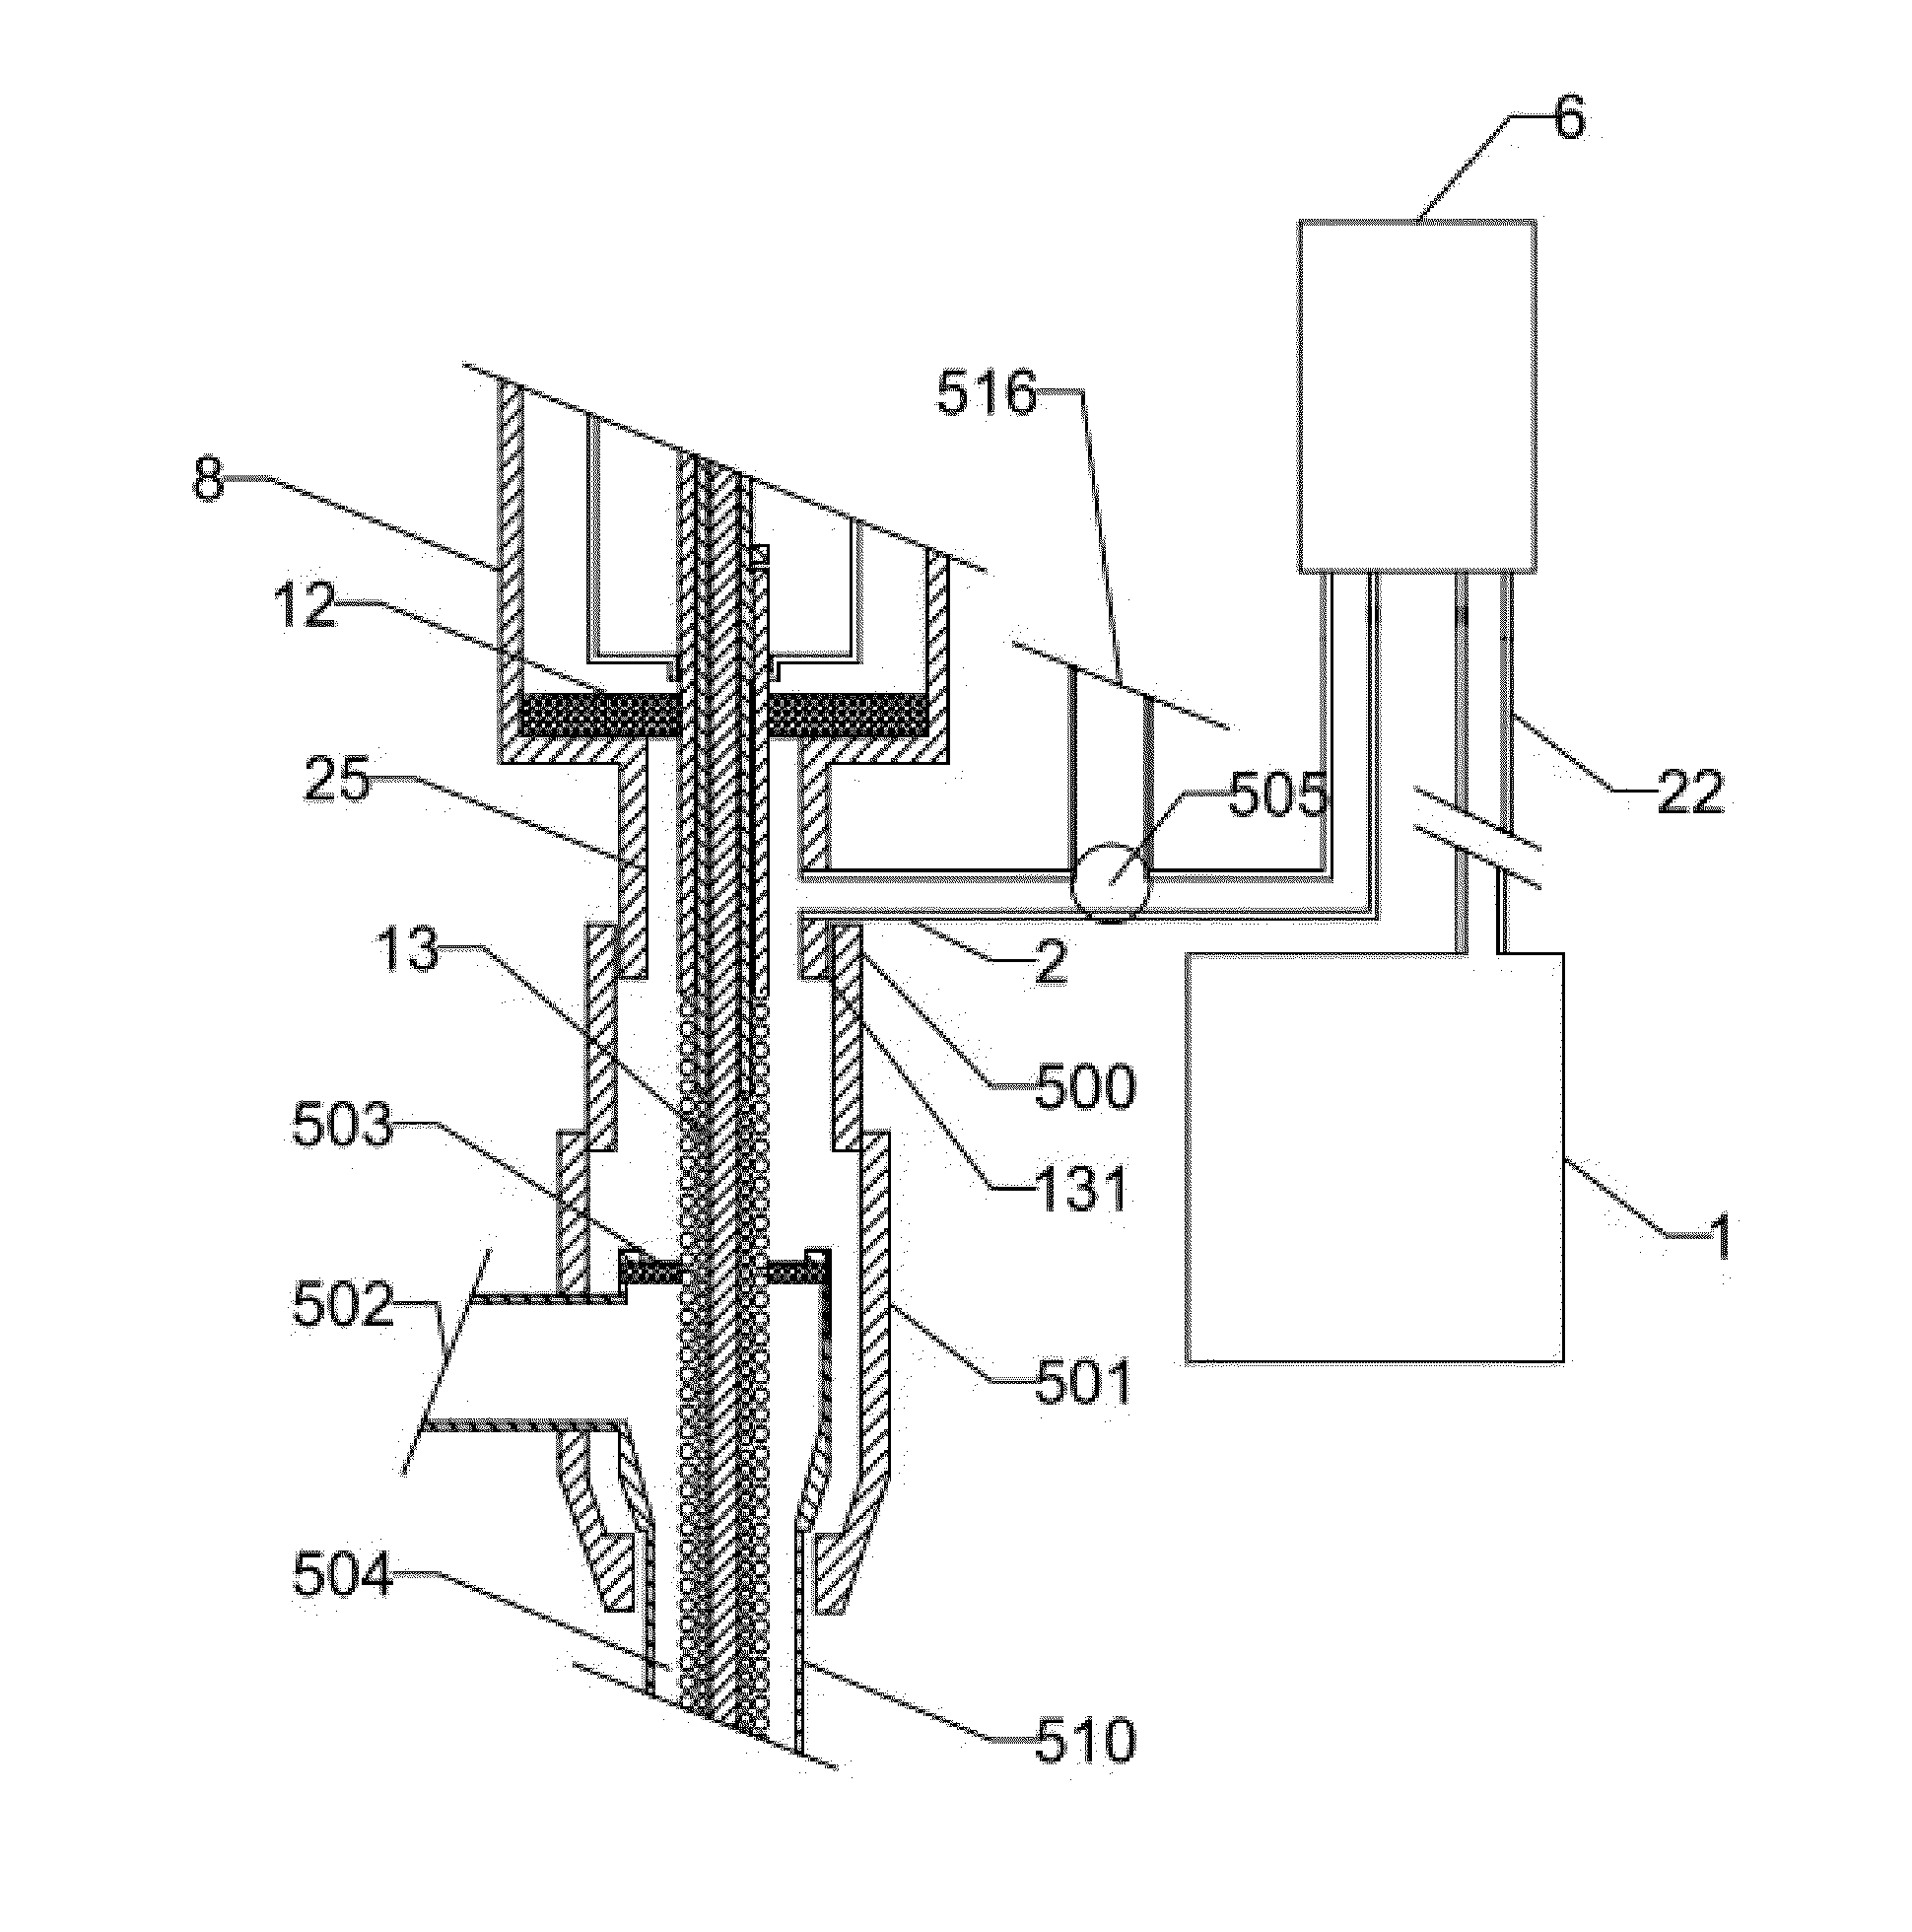 Expandable atherectomy device